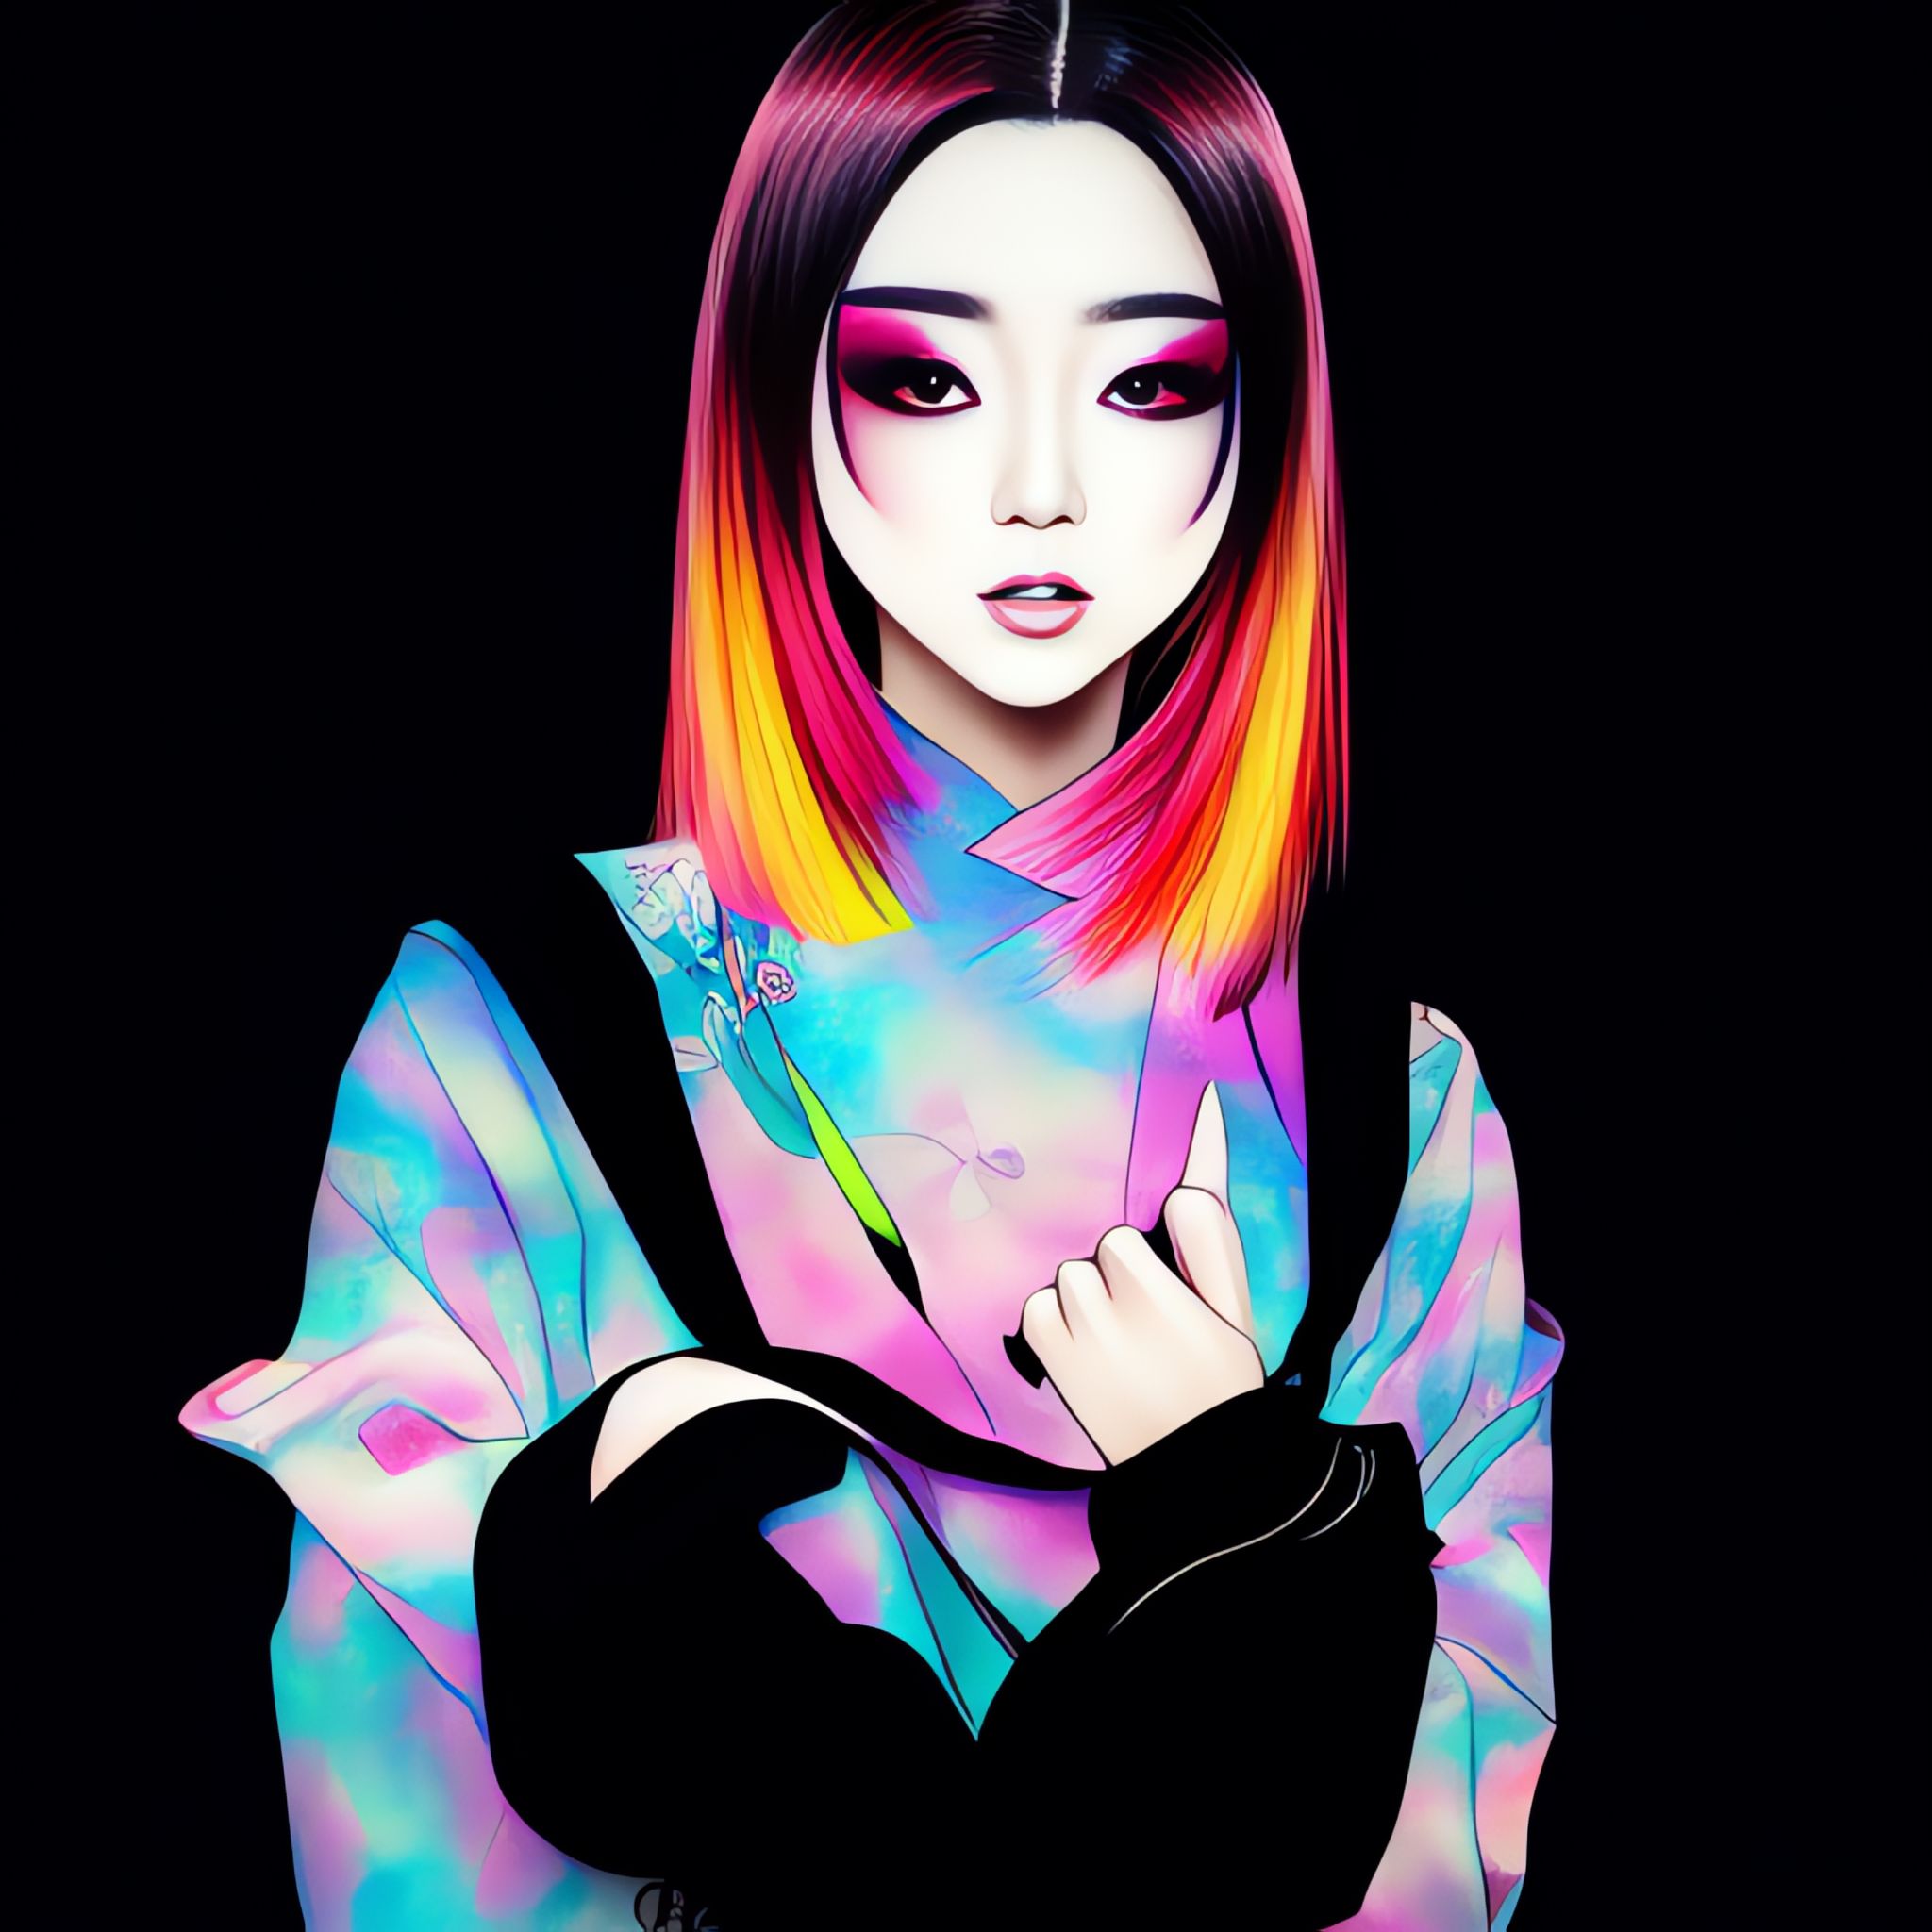 Portrait-of-an-asian-woman-with-colorful-make-up-manga-art-style-hyper-realistic-8k-photo-detailed-p-0kxh